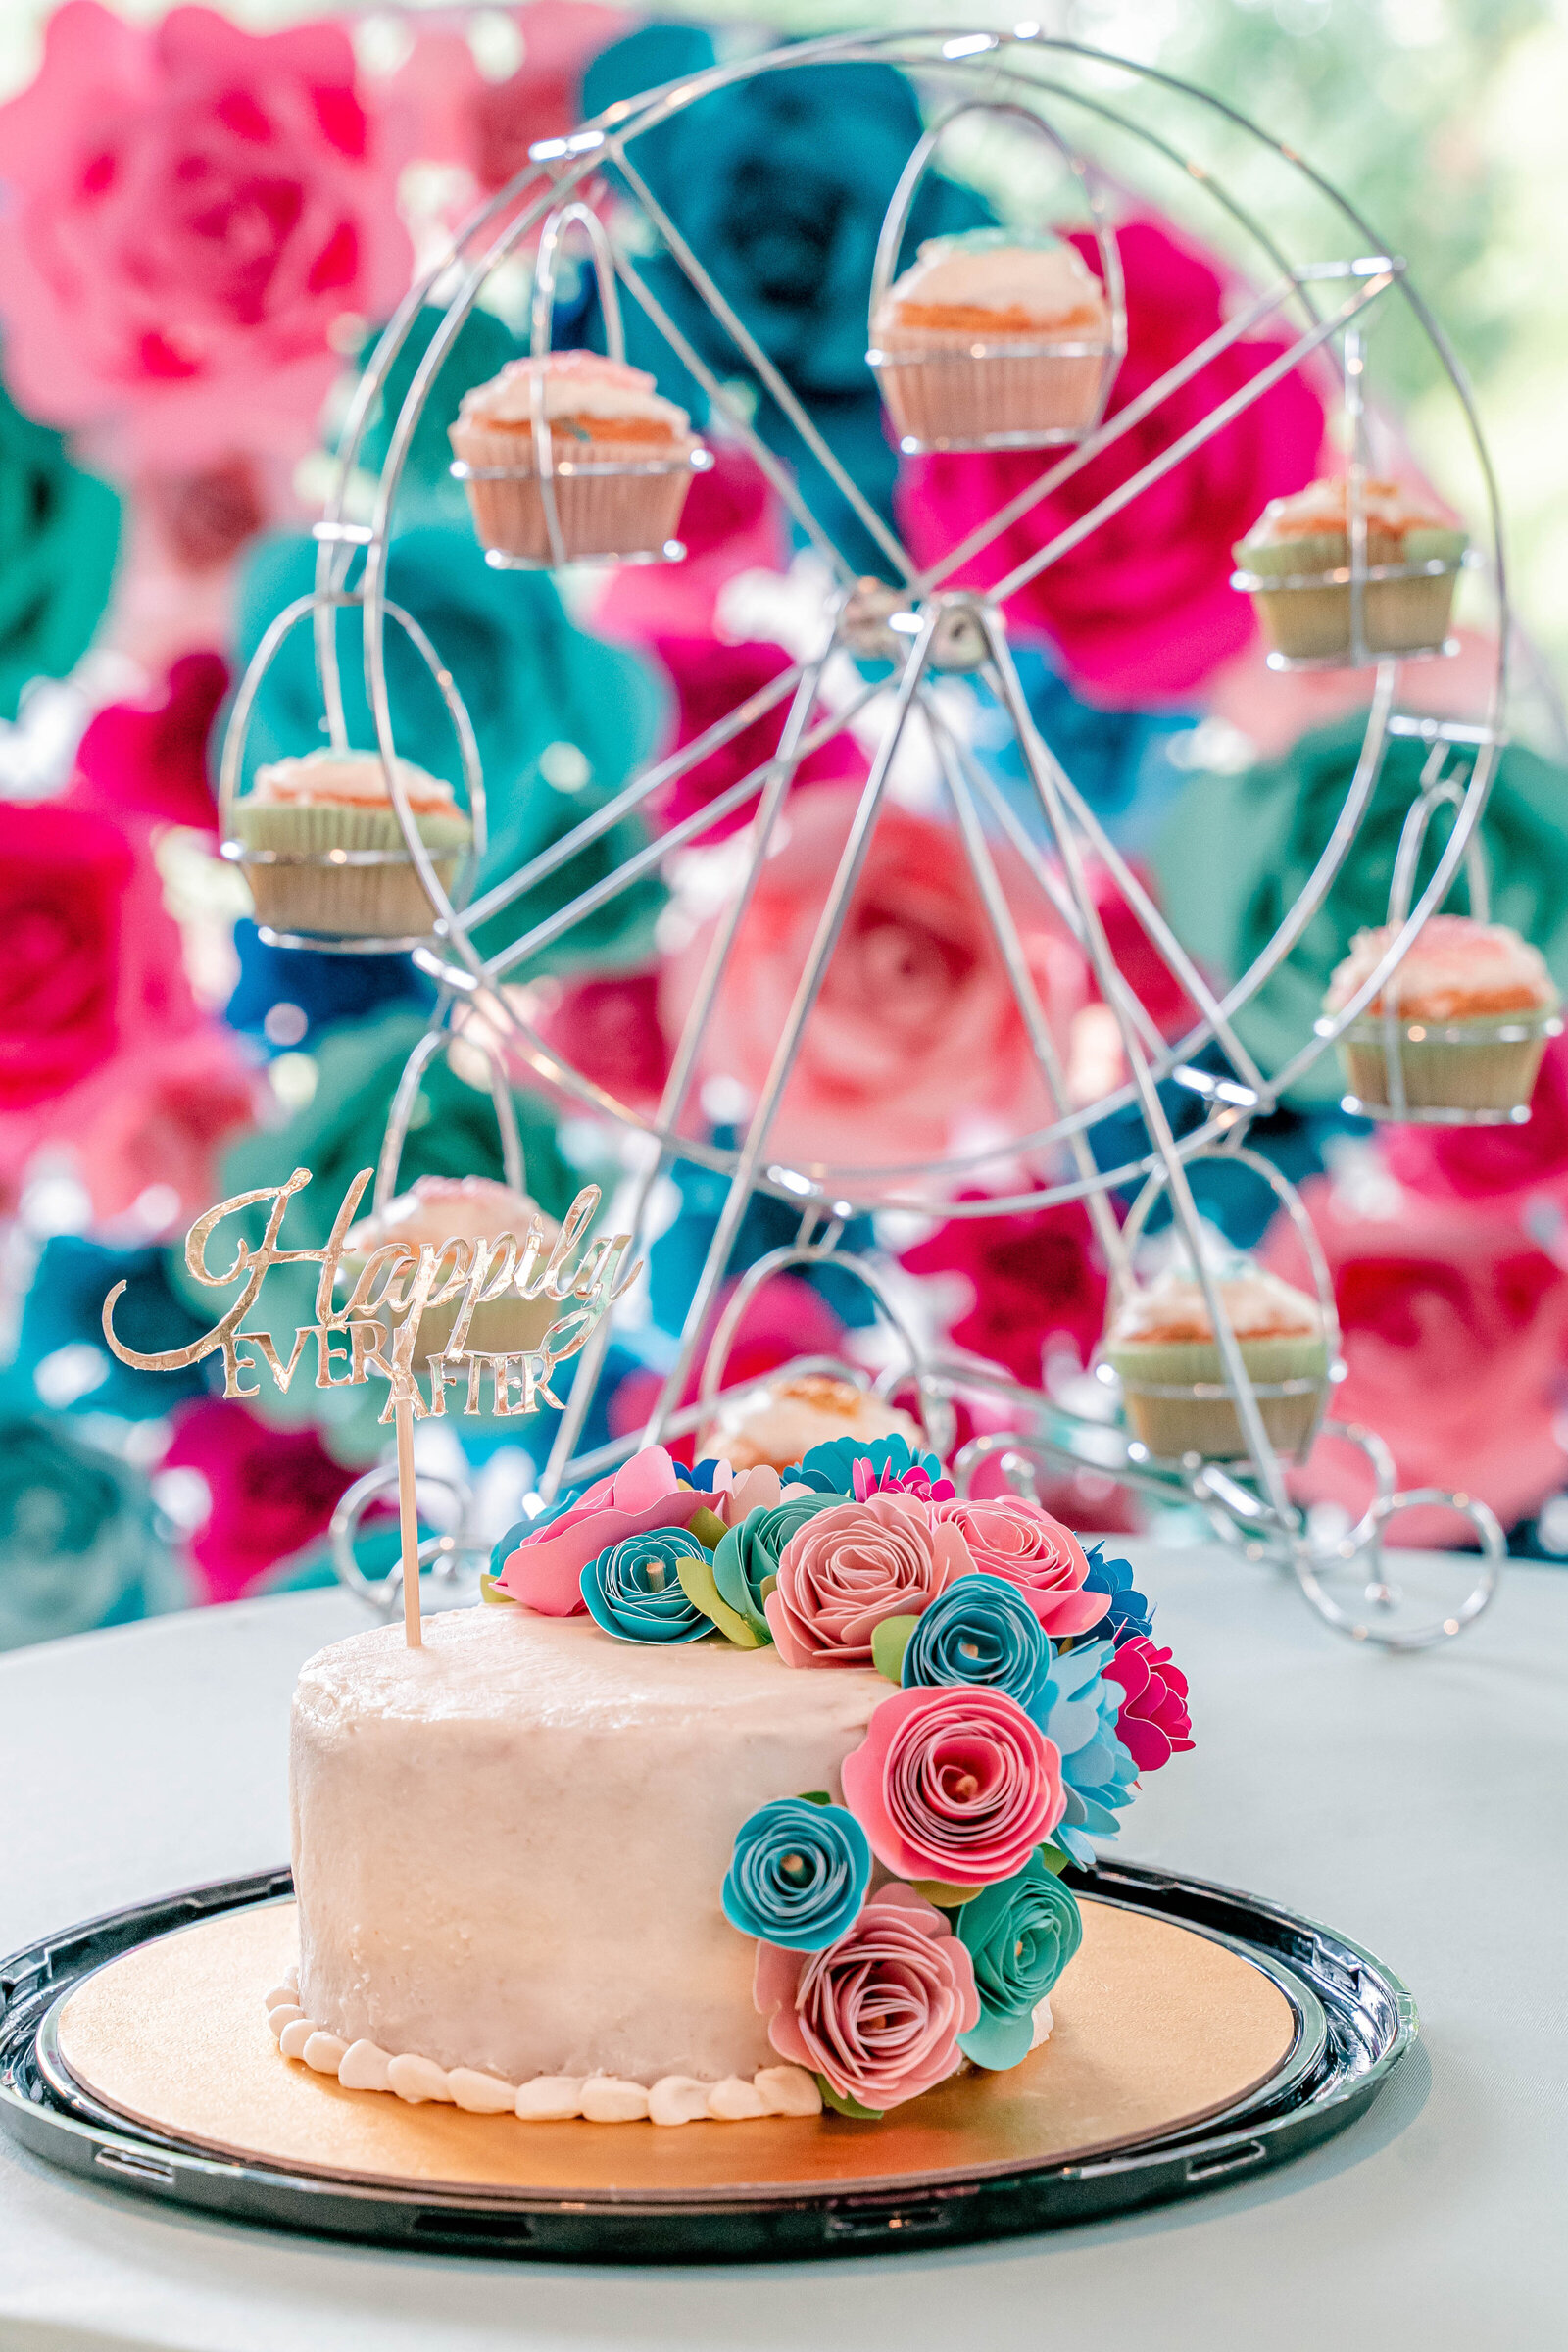 A cake covered in colorful paper flowers during a whimsical wedding at Glen Echo Park in Washington DC